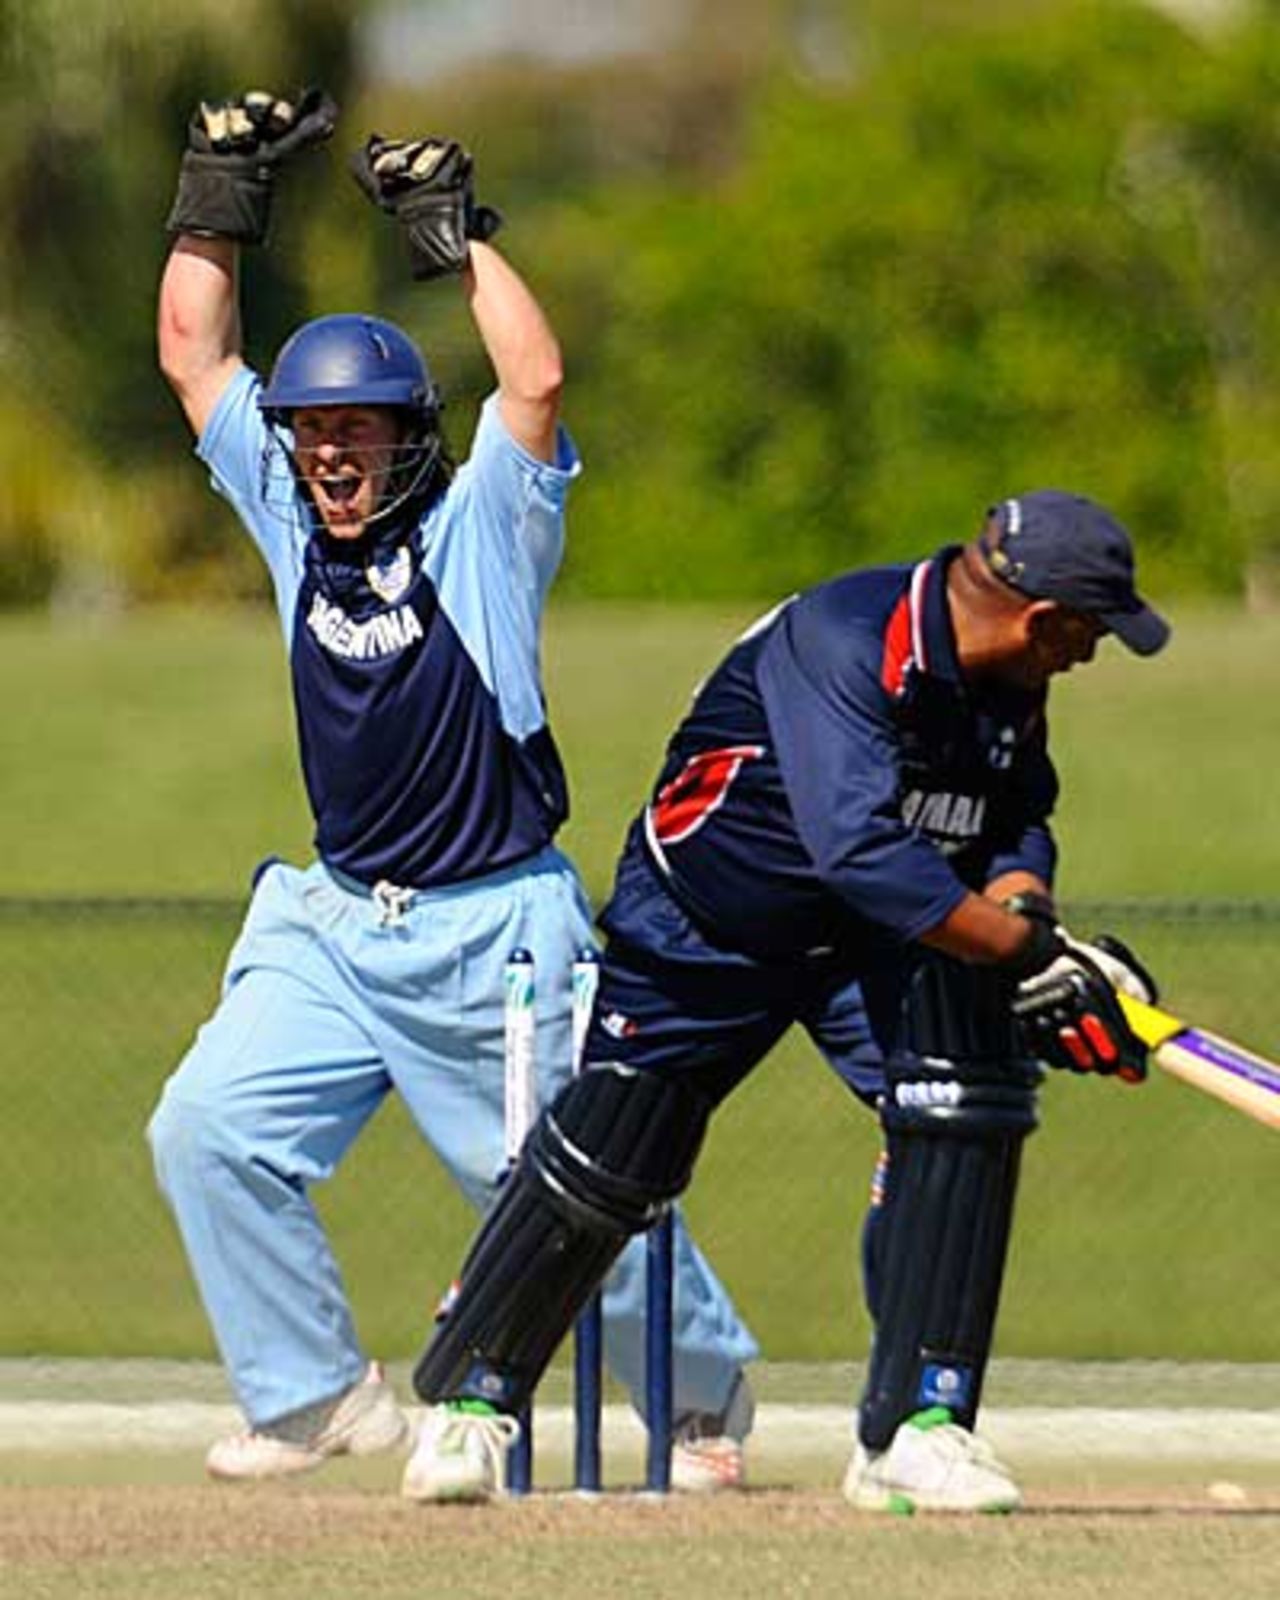 Pearson Best is bowled after his impressive 109, Cayman Islands v Argentina, ICC Americas Division 1, Florida, November 27, 2008